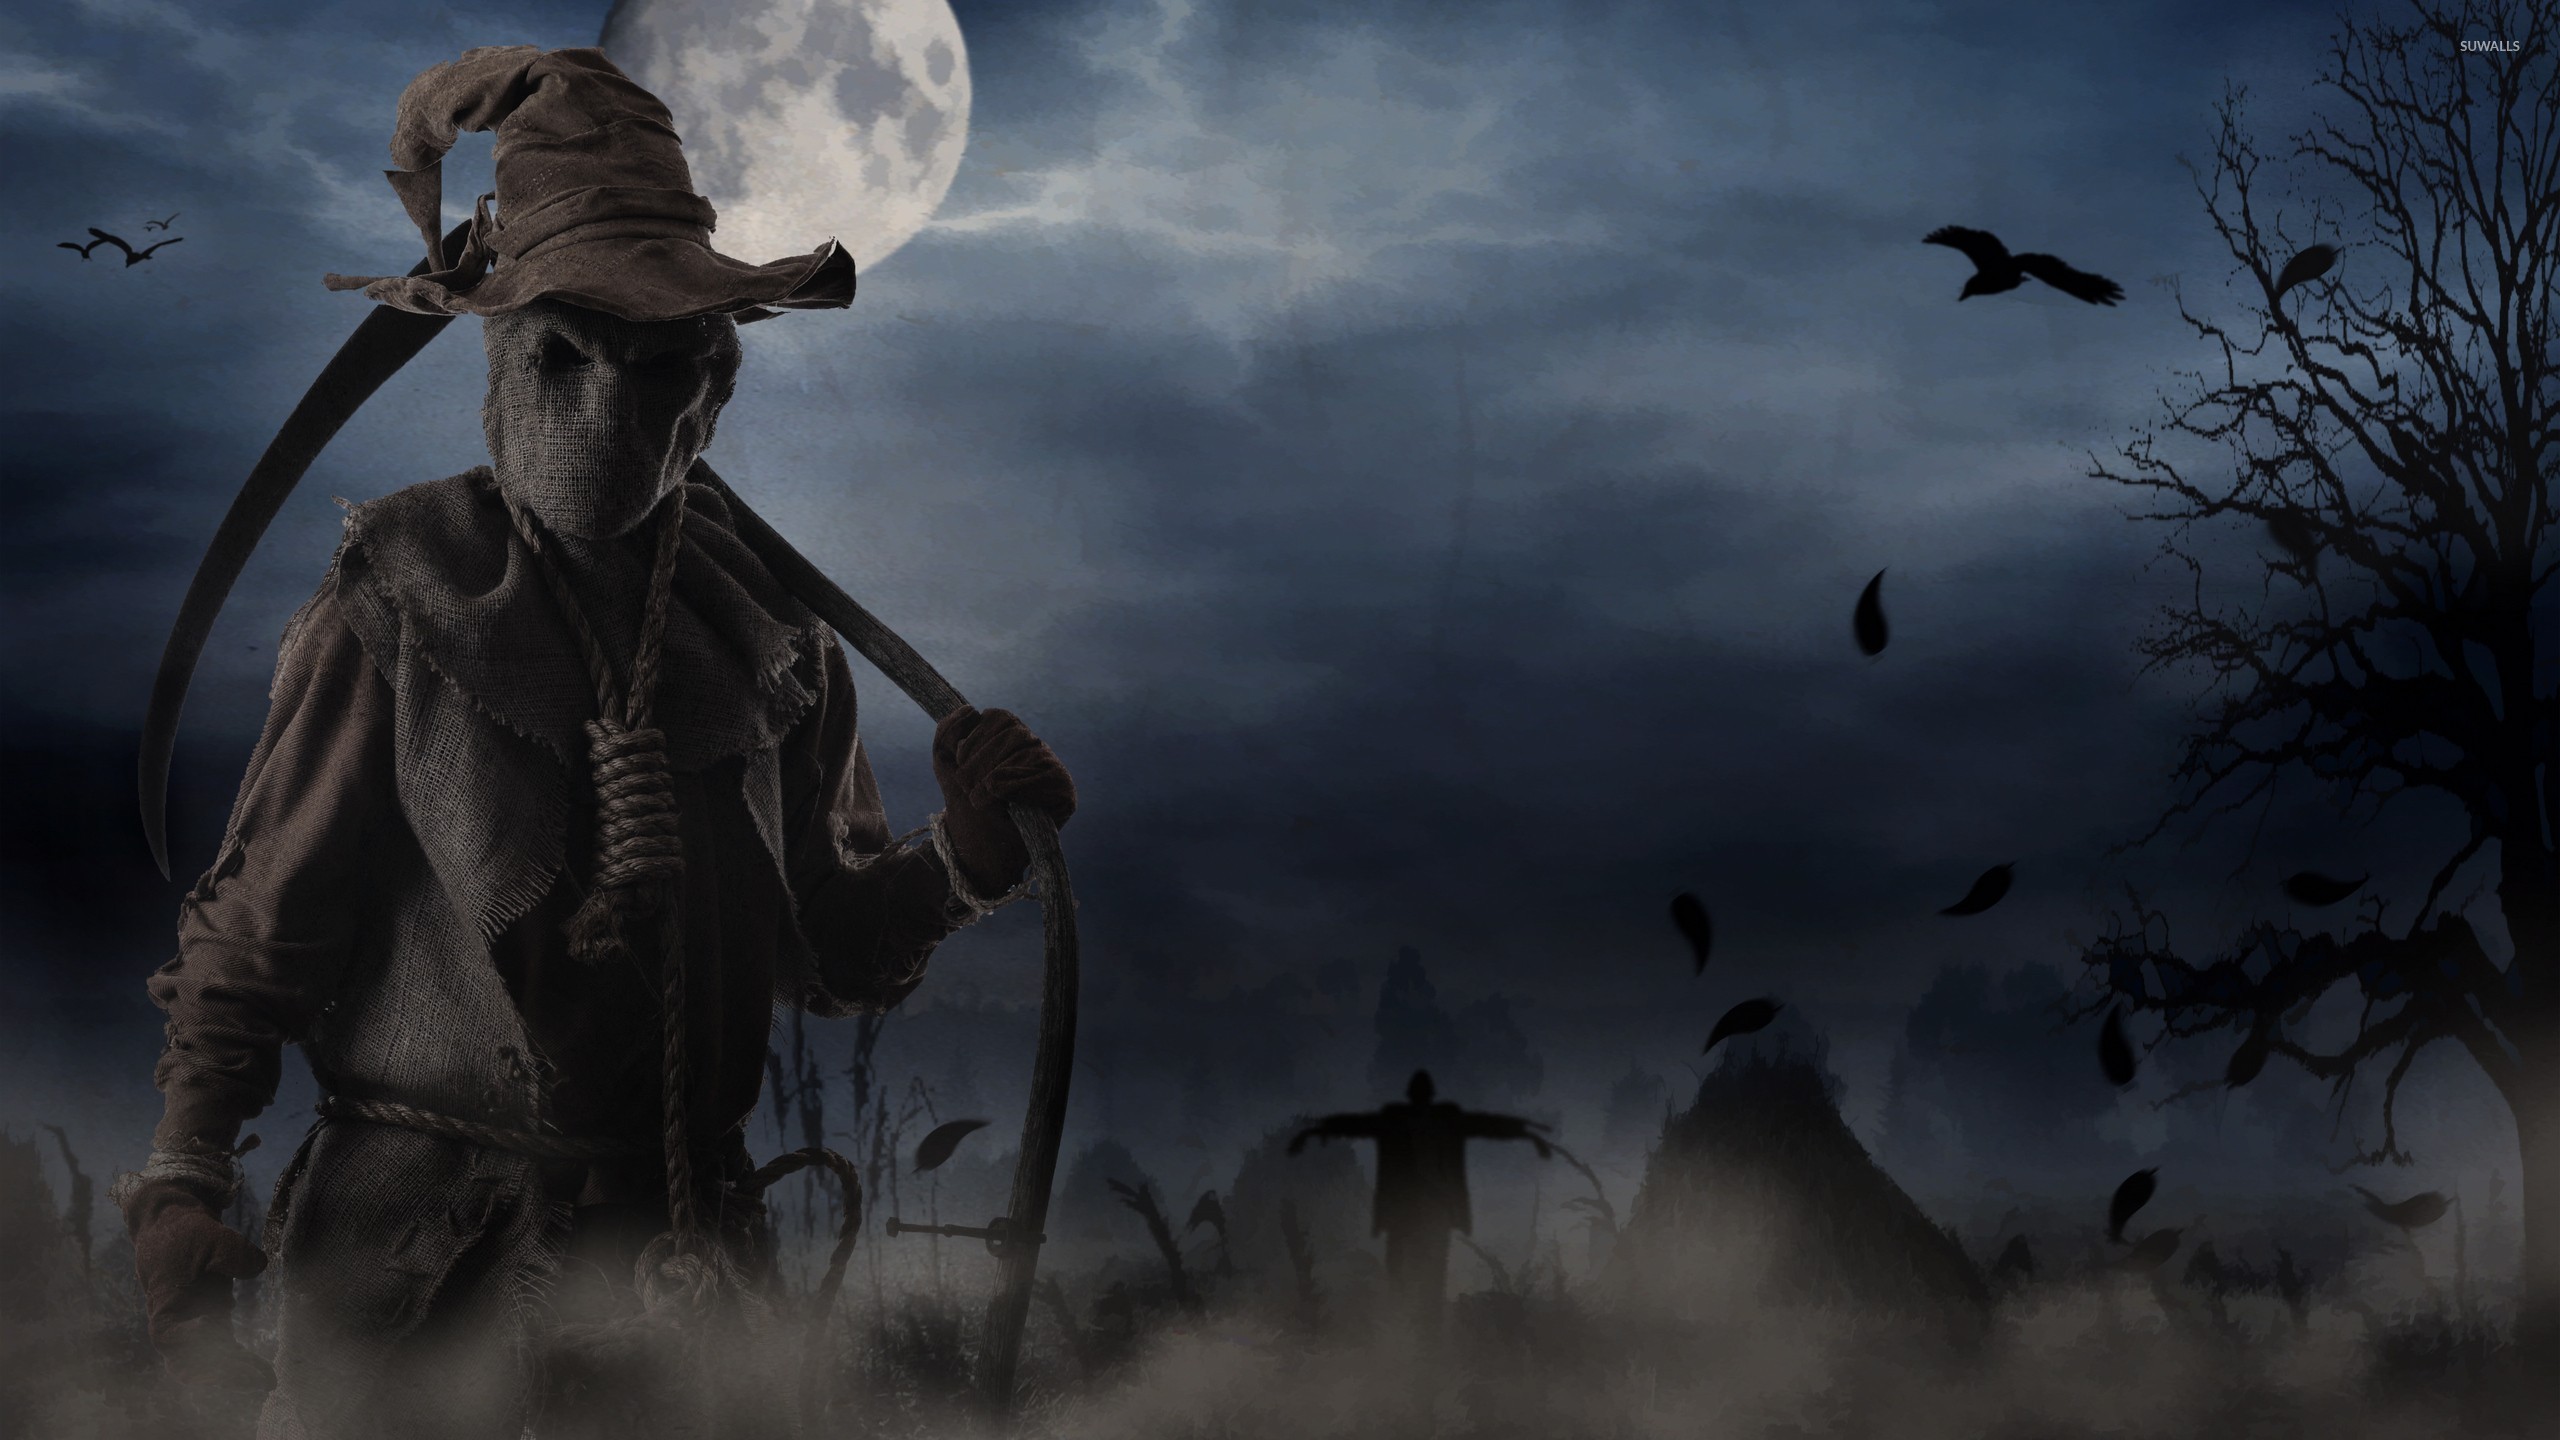 Scary scarecrow wallpaper - Fantasy wallpapers - #44233